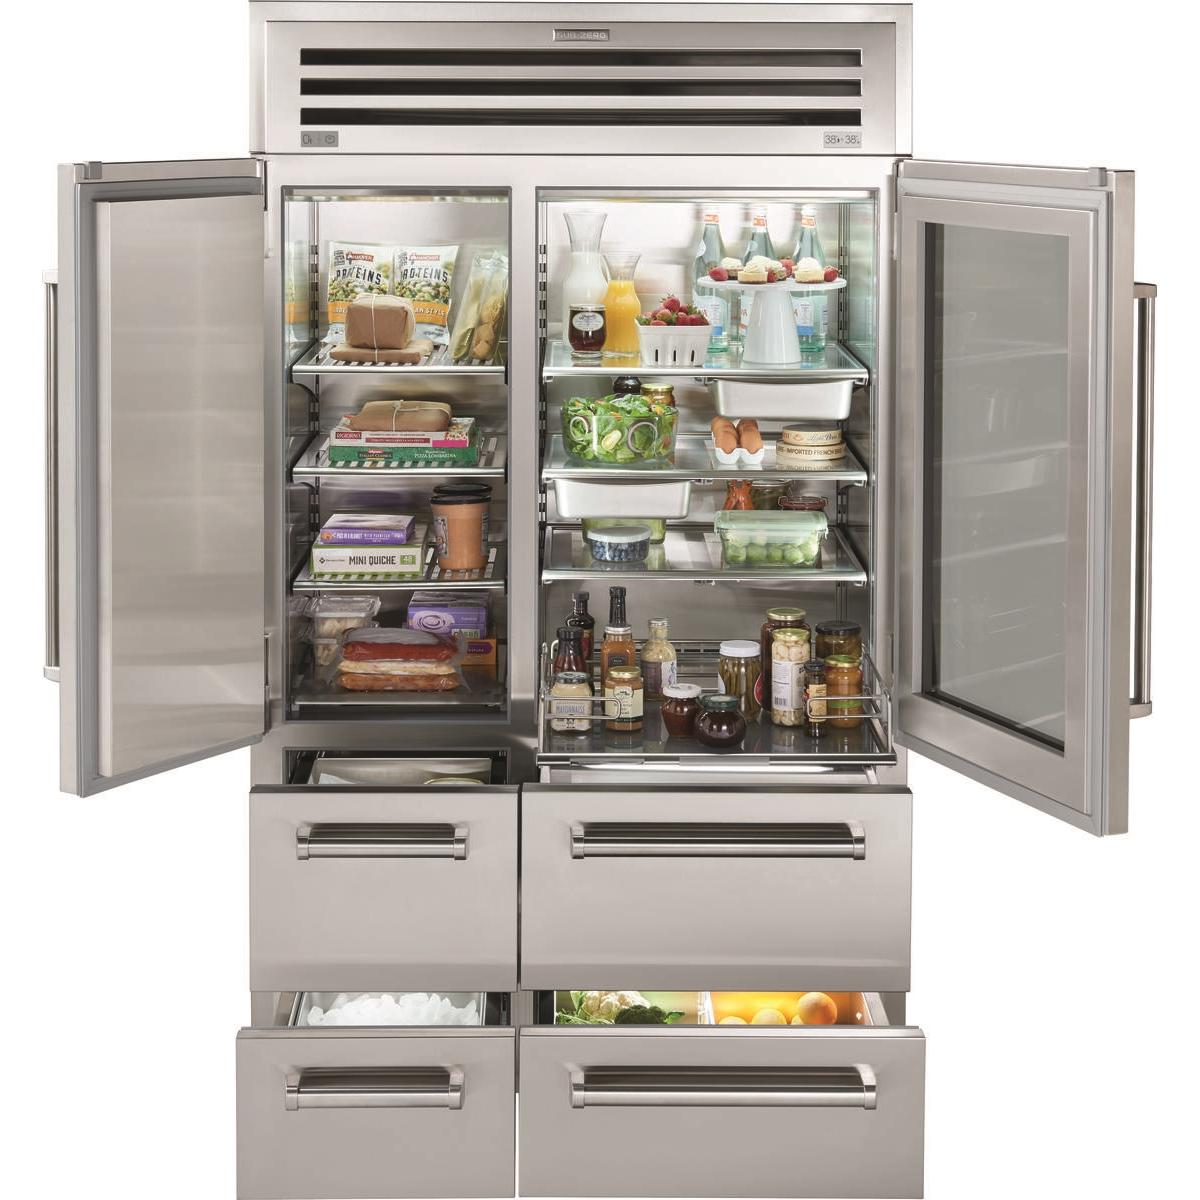 Sub-Zero 48-inch, 30.4 cu.ft. Built-in Side-by-Side Refrigerator with Glass Door PRO4850G